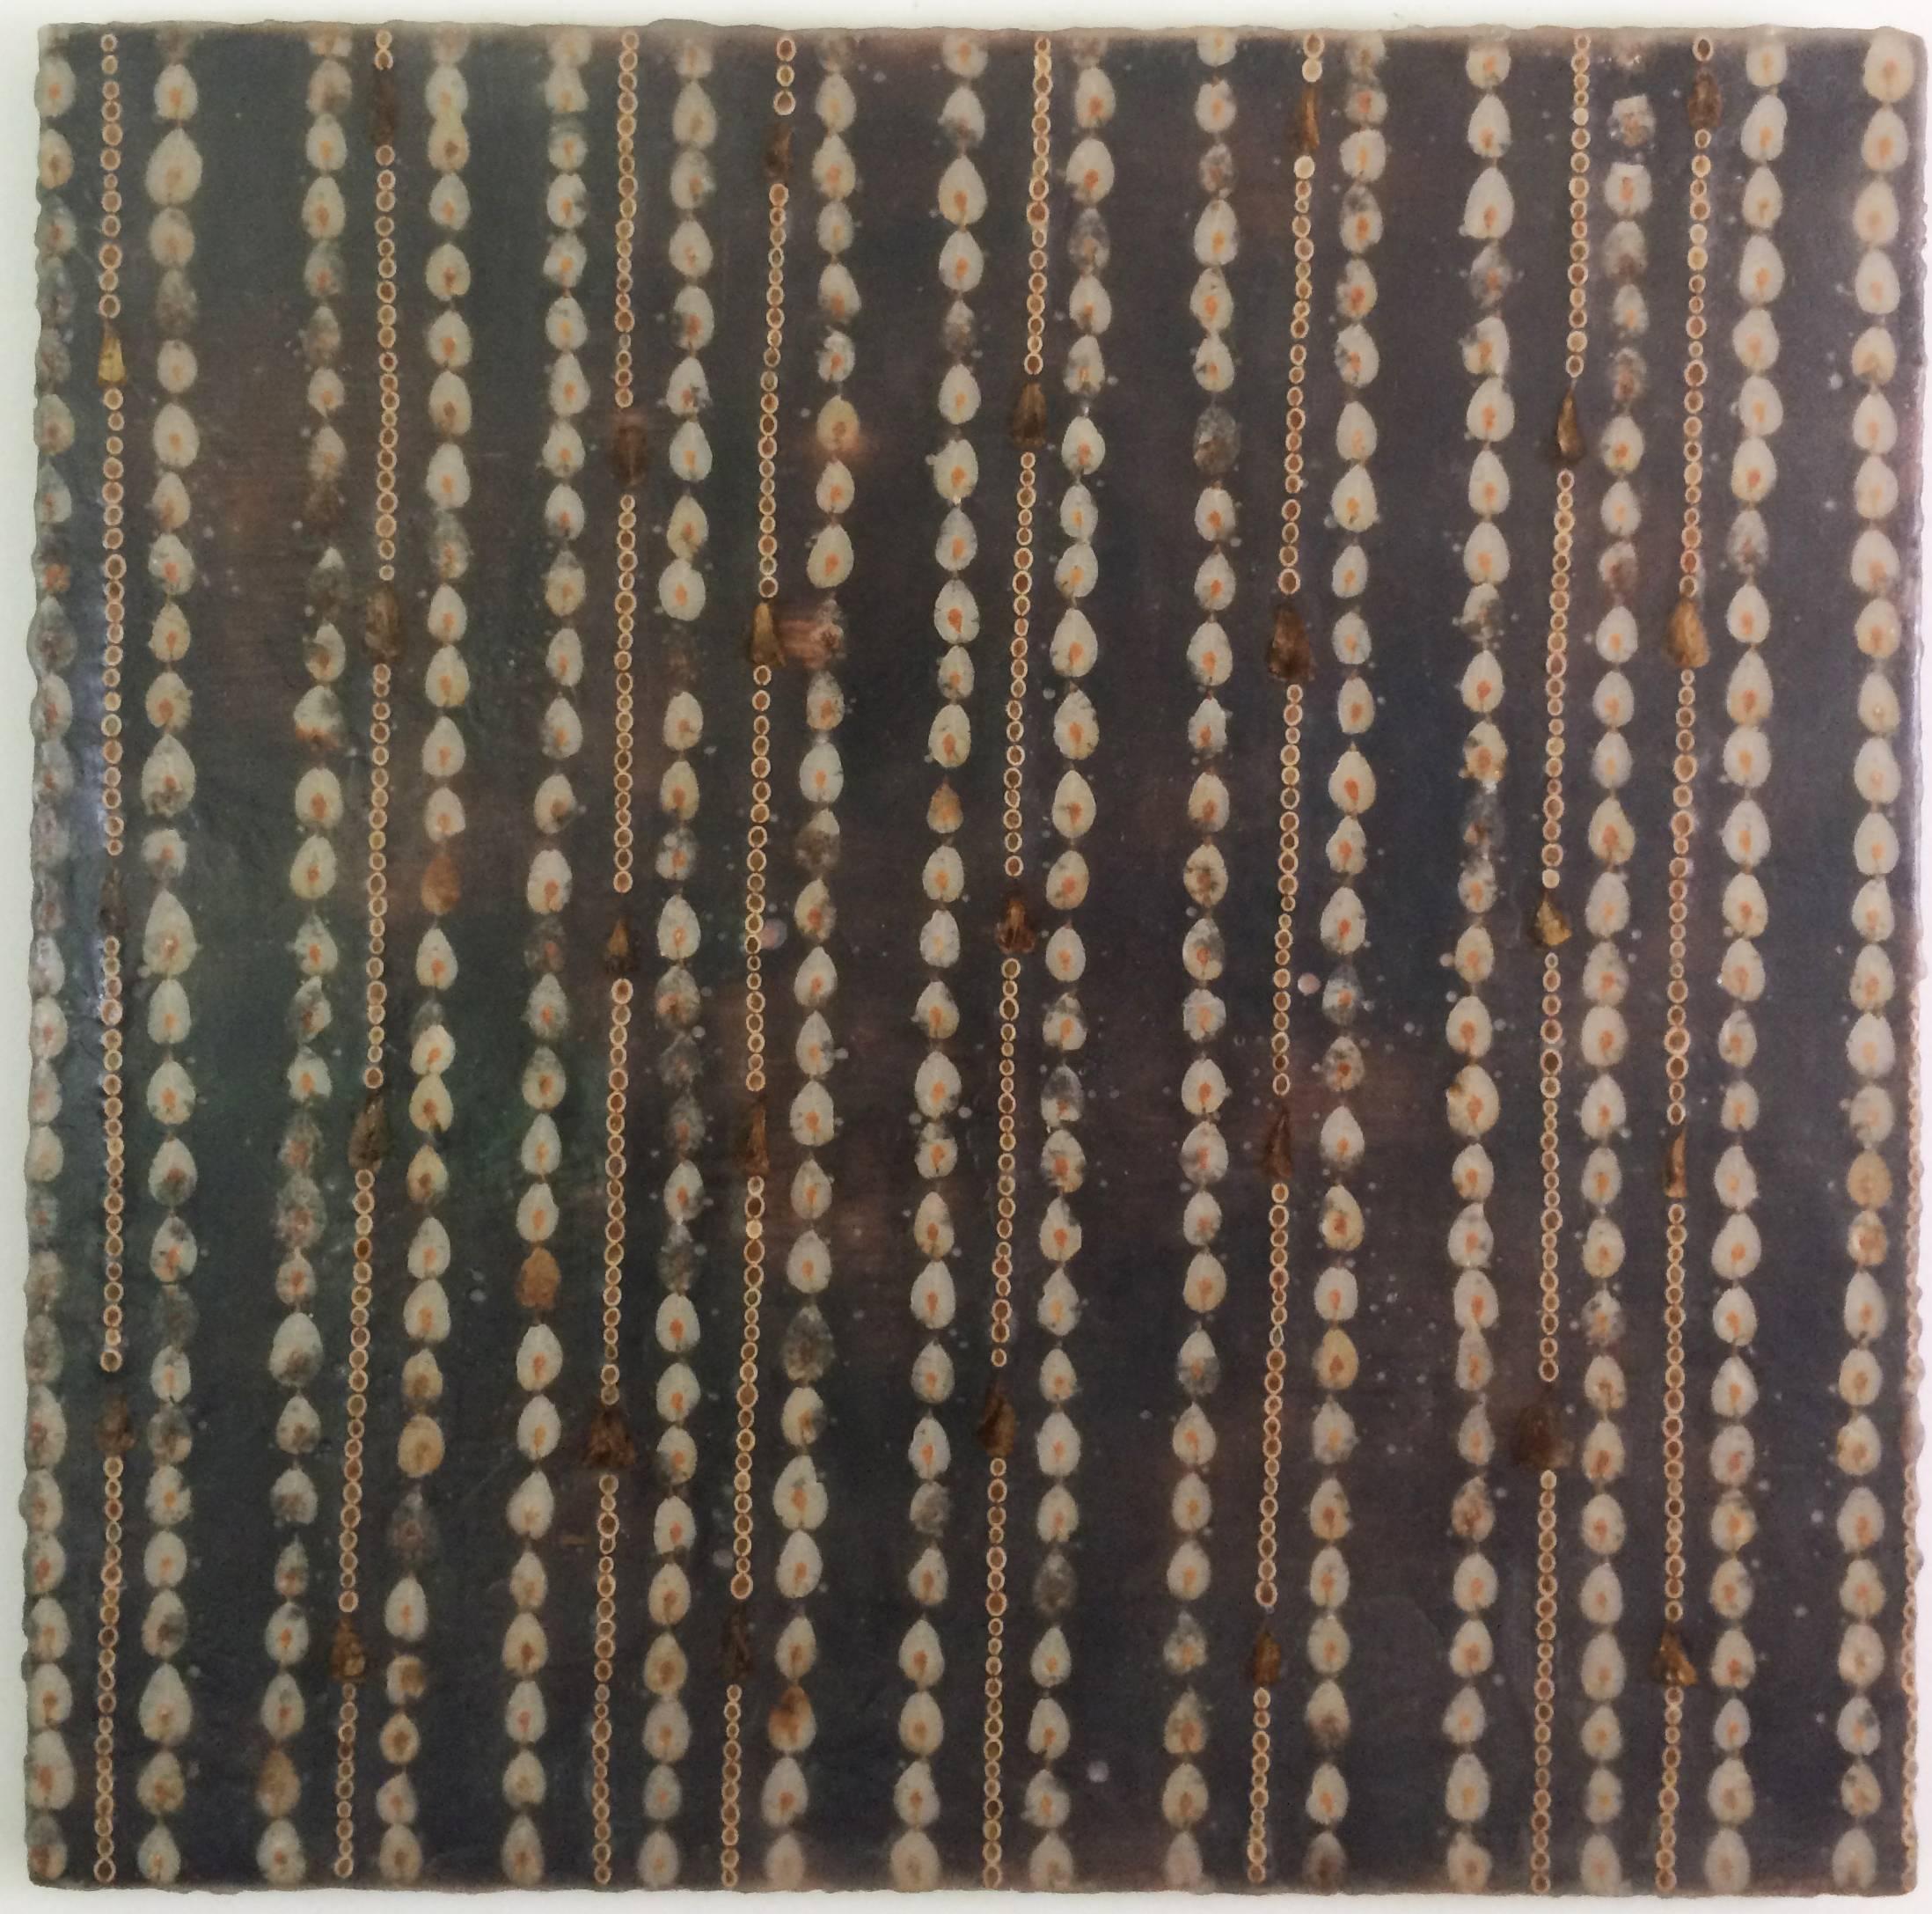 Allyson Levy Abstract Painting - Wallpaper (Modern Mixed Media Black Encaustic Painting with Brown Seeds on Wood)